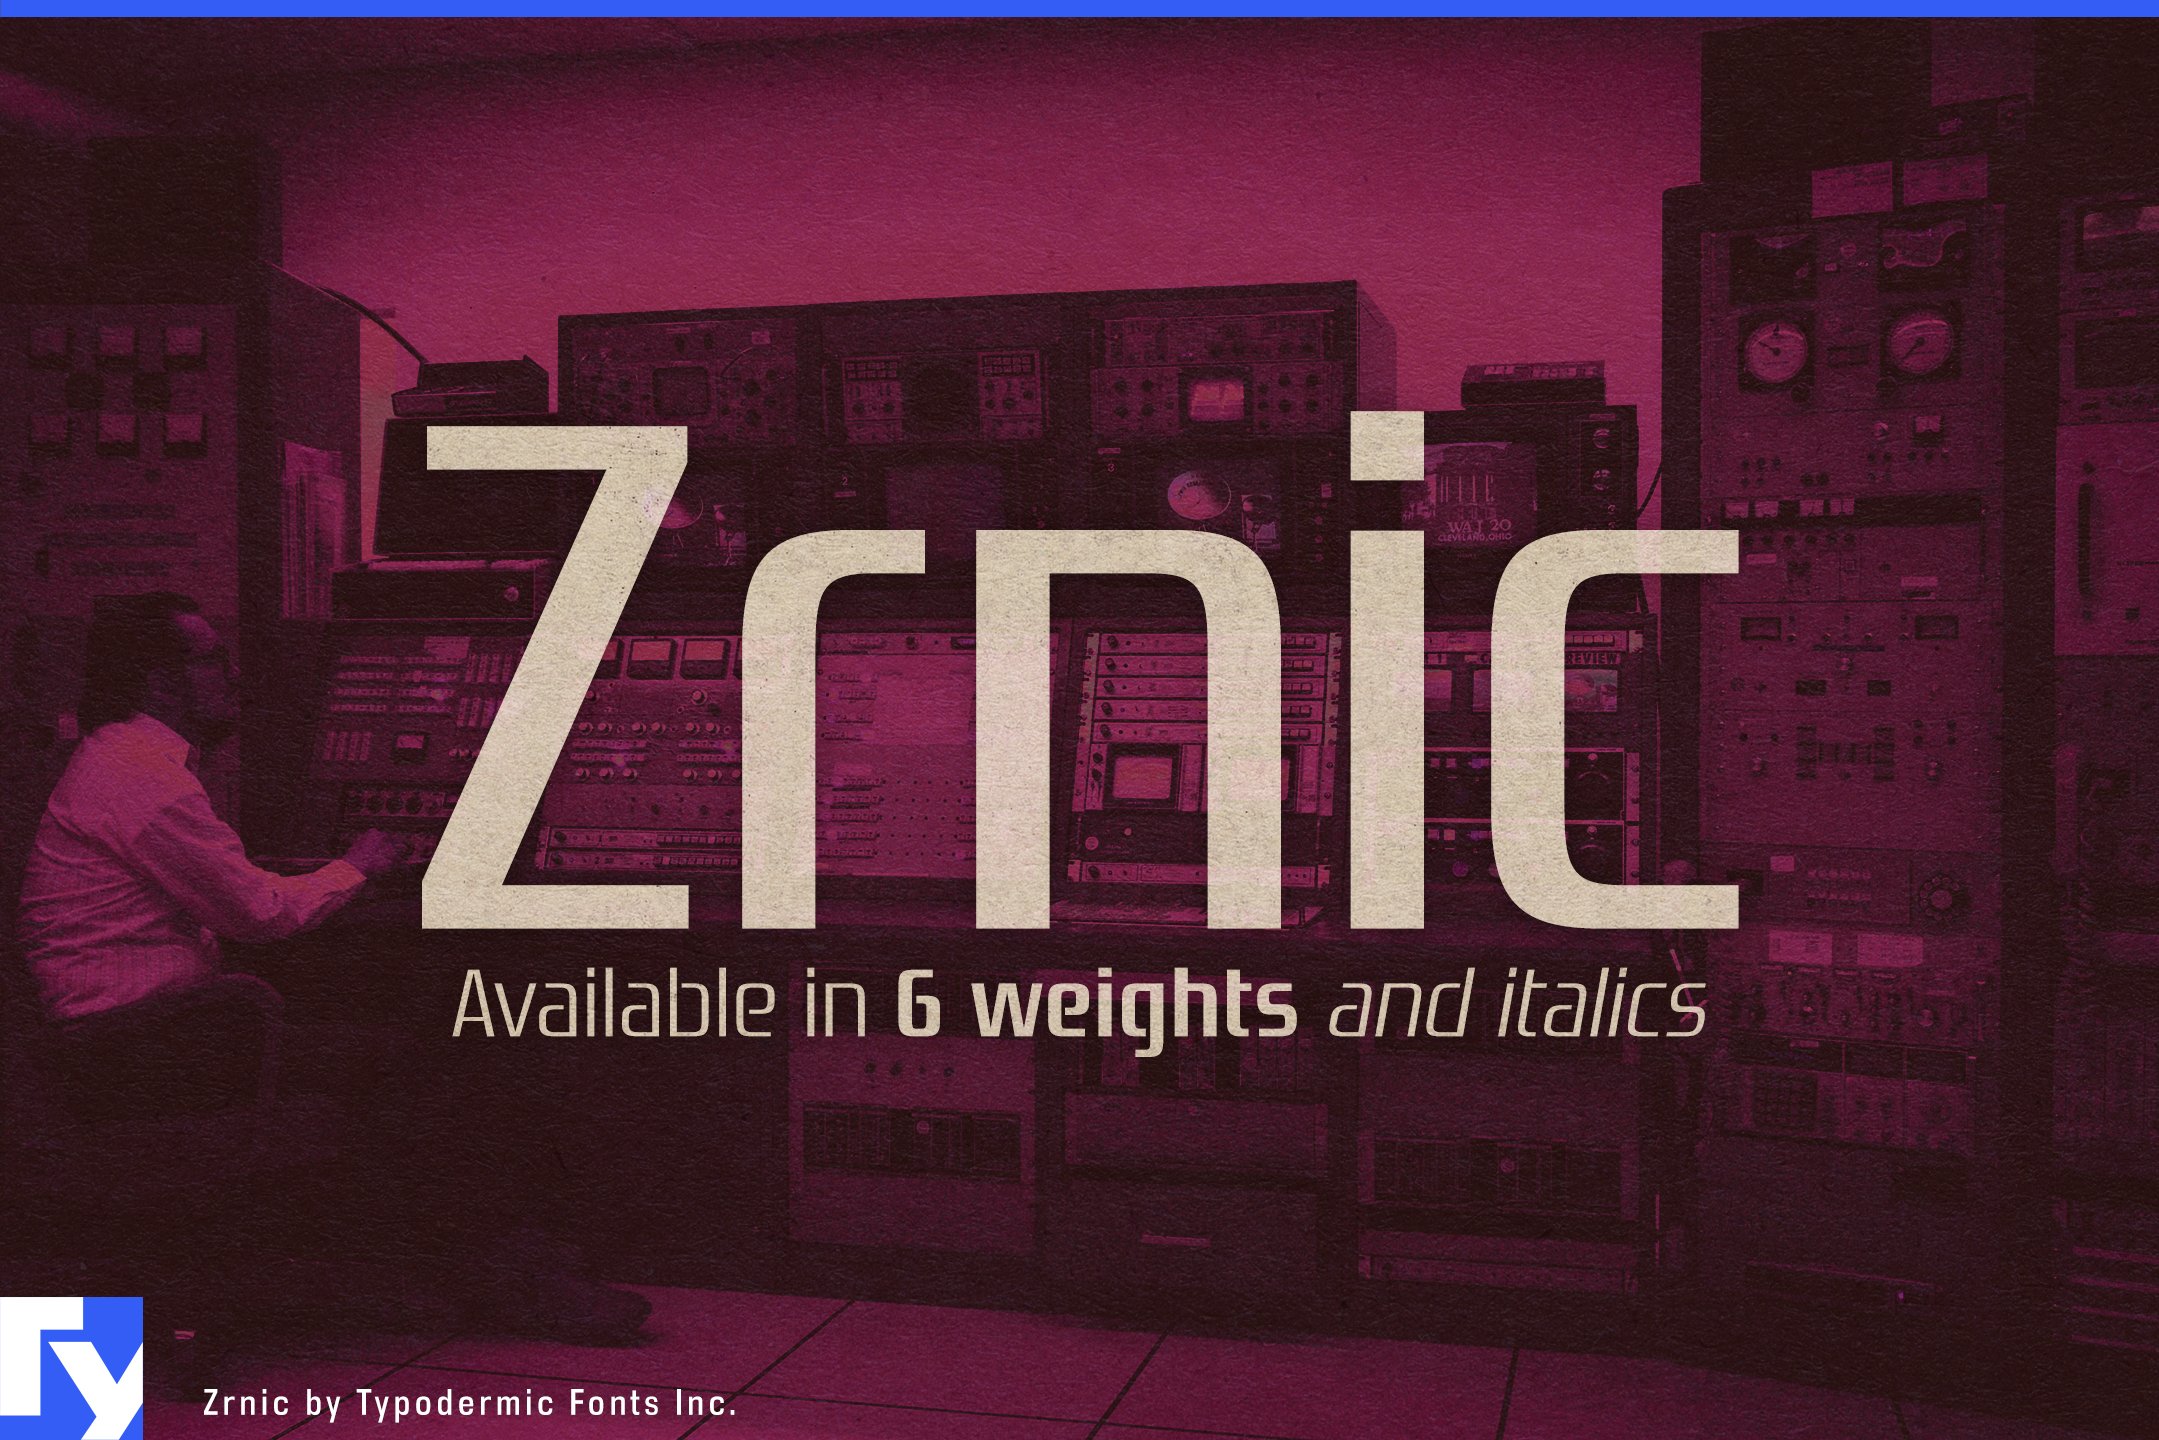 Zrnic cover image.